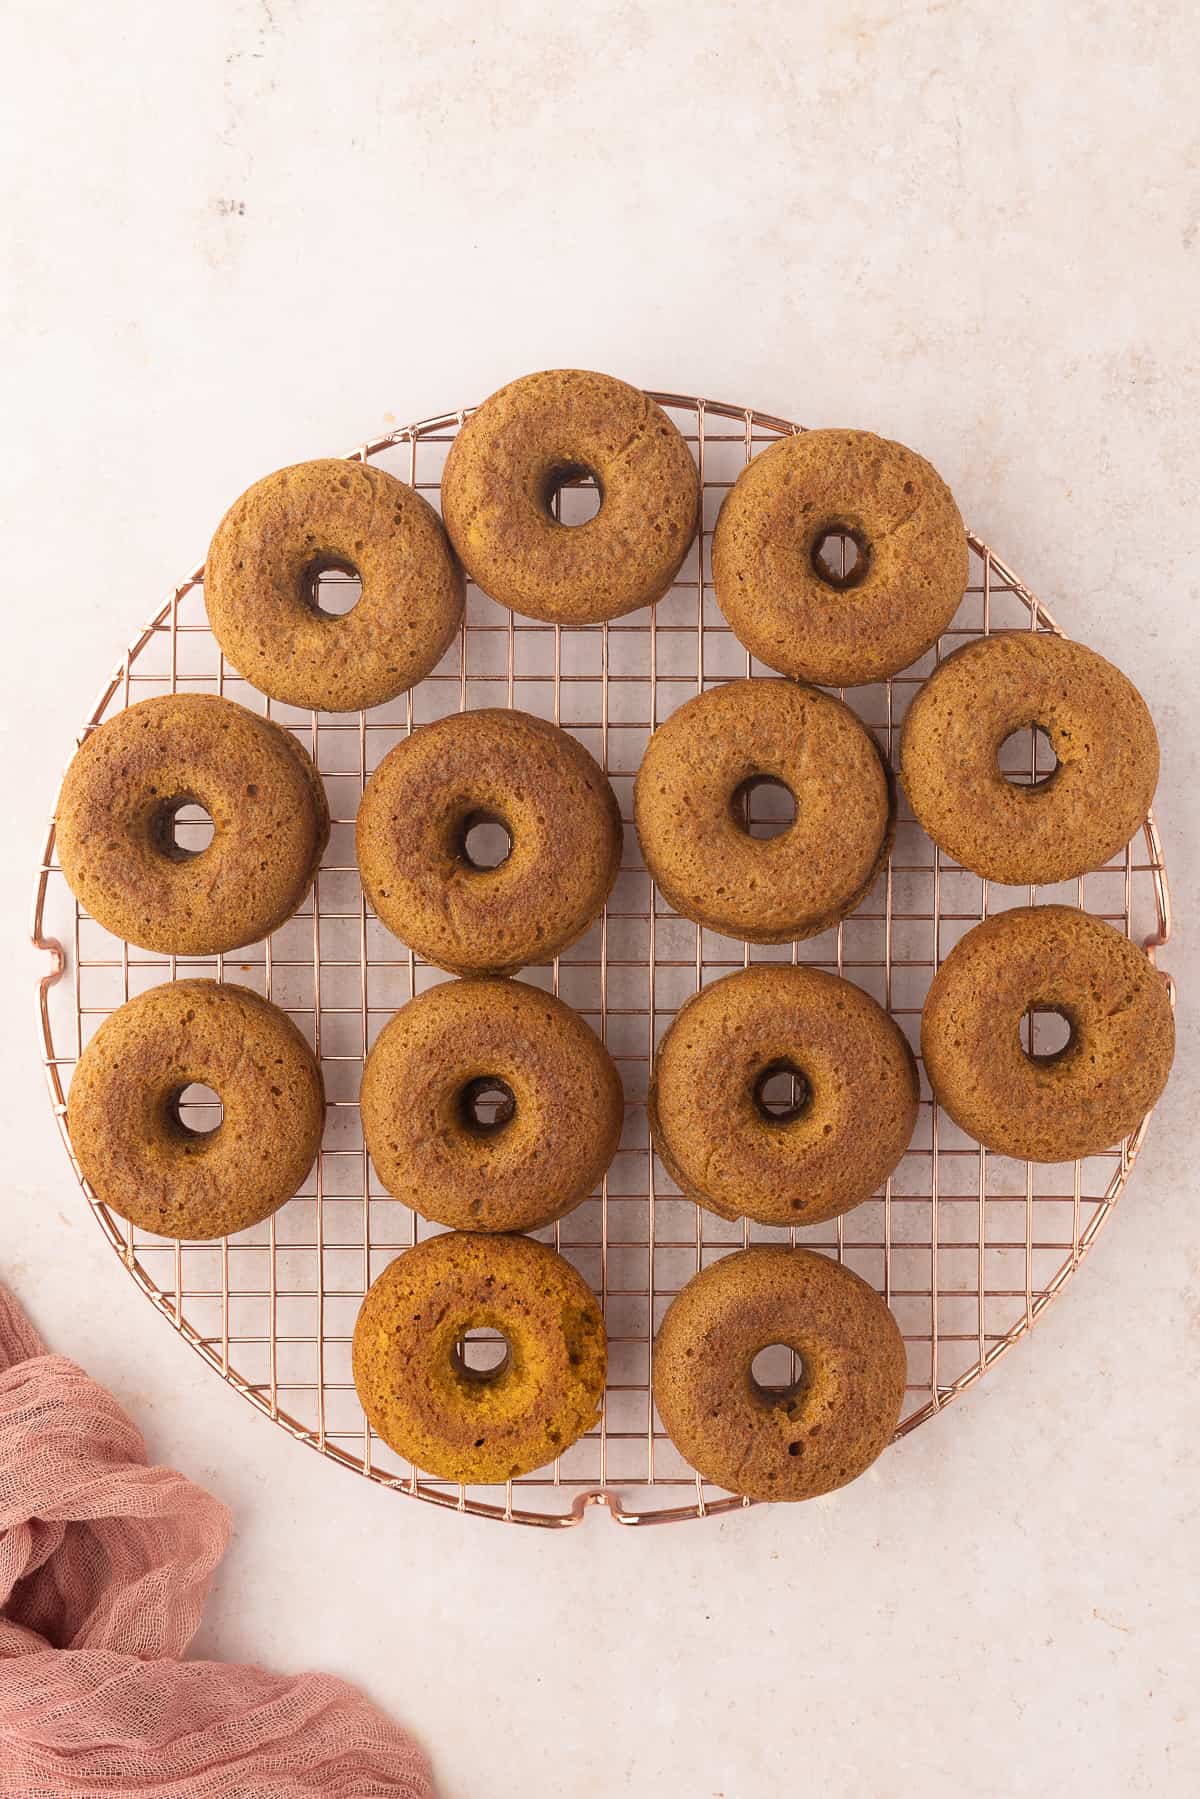 Baked donuts on a cooling rack.